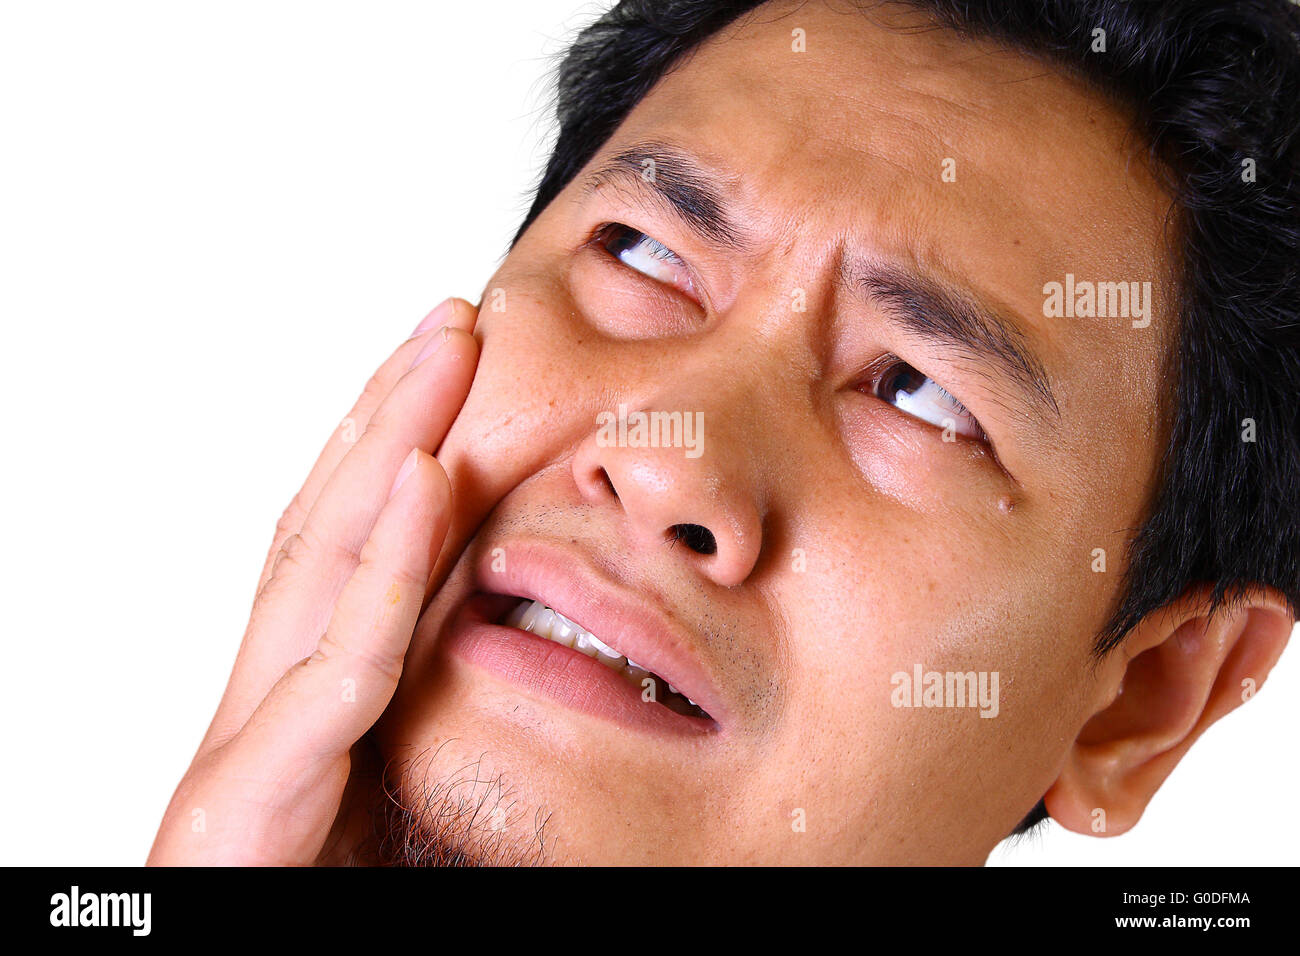 Young Asian man in pain of toothache holding his cheek Stock Photo